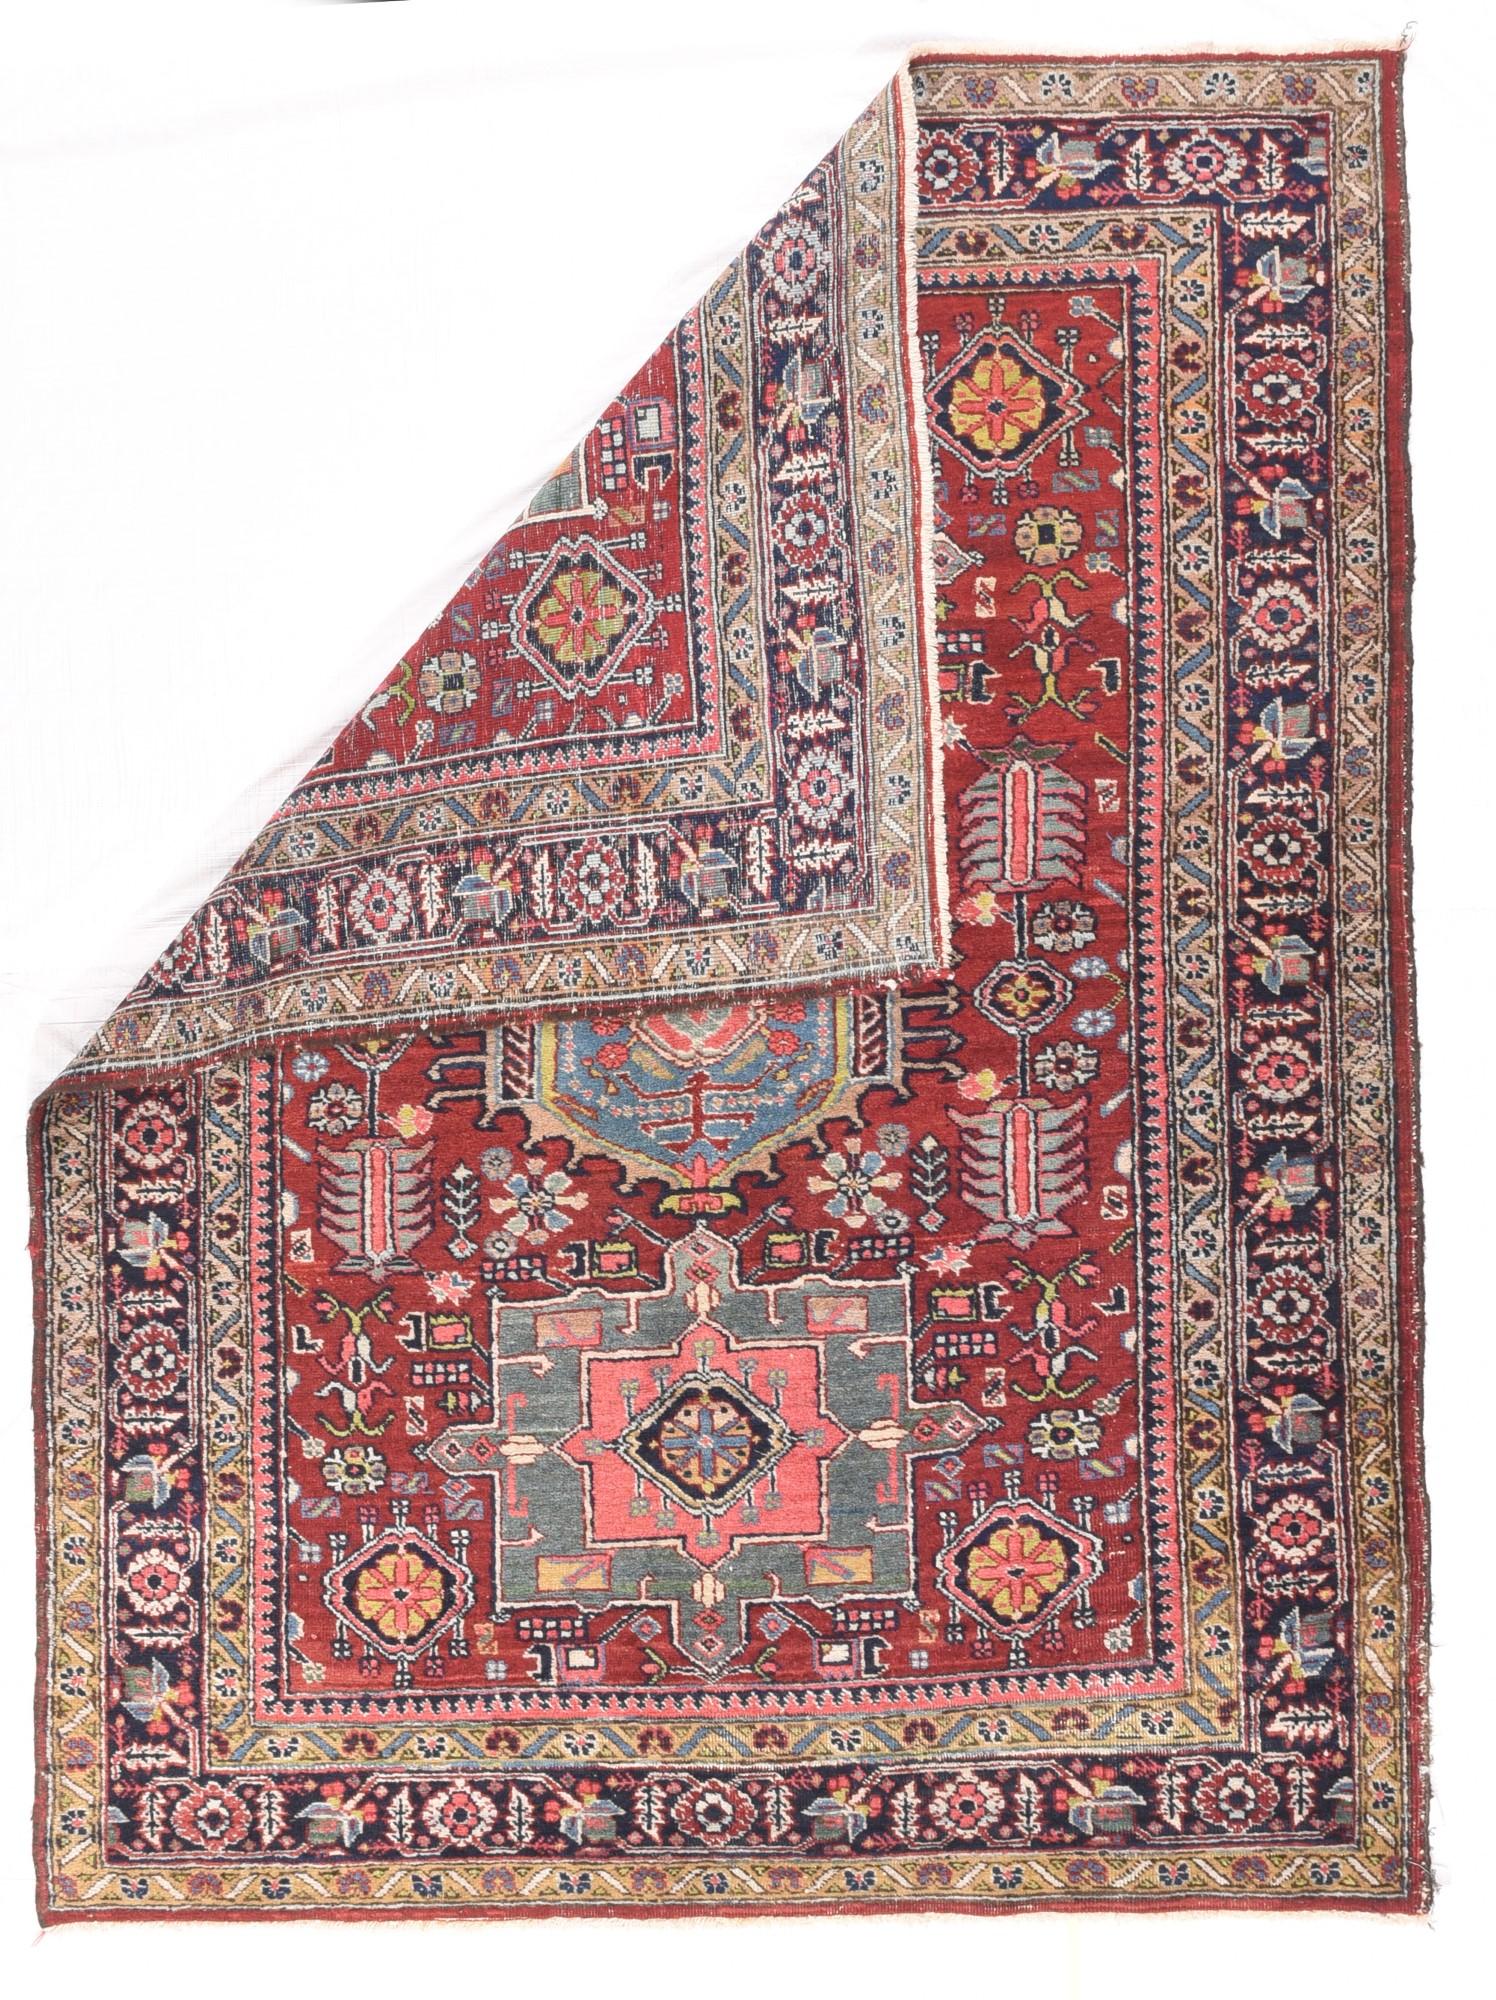 Vintage Heriz rug 4.6'' x 5.9''. Karaja village is located in the NW Persian Heriz weaving district, so technically this is a 